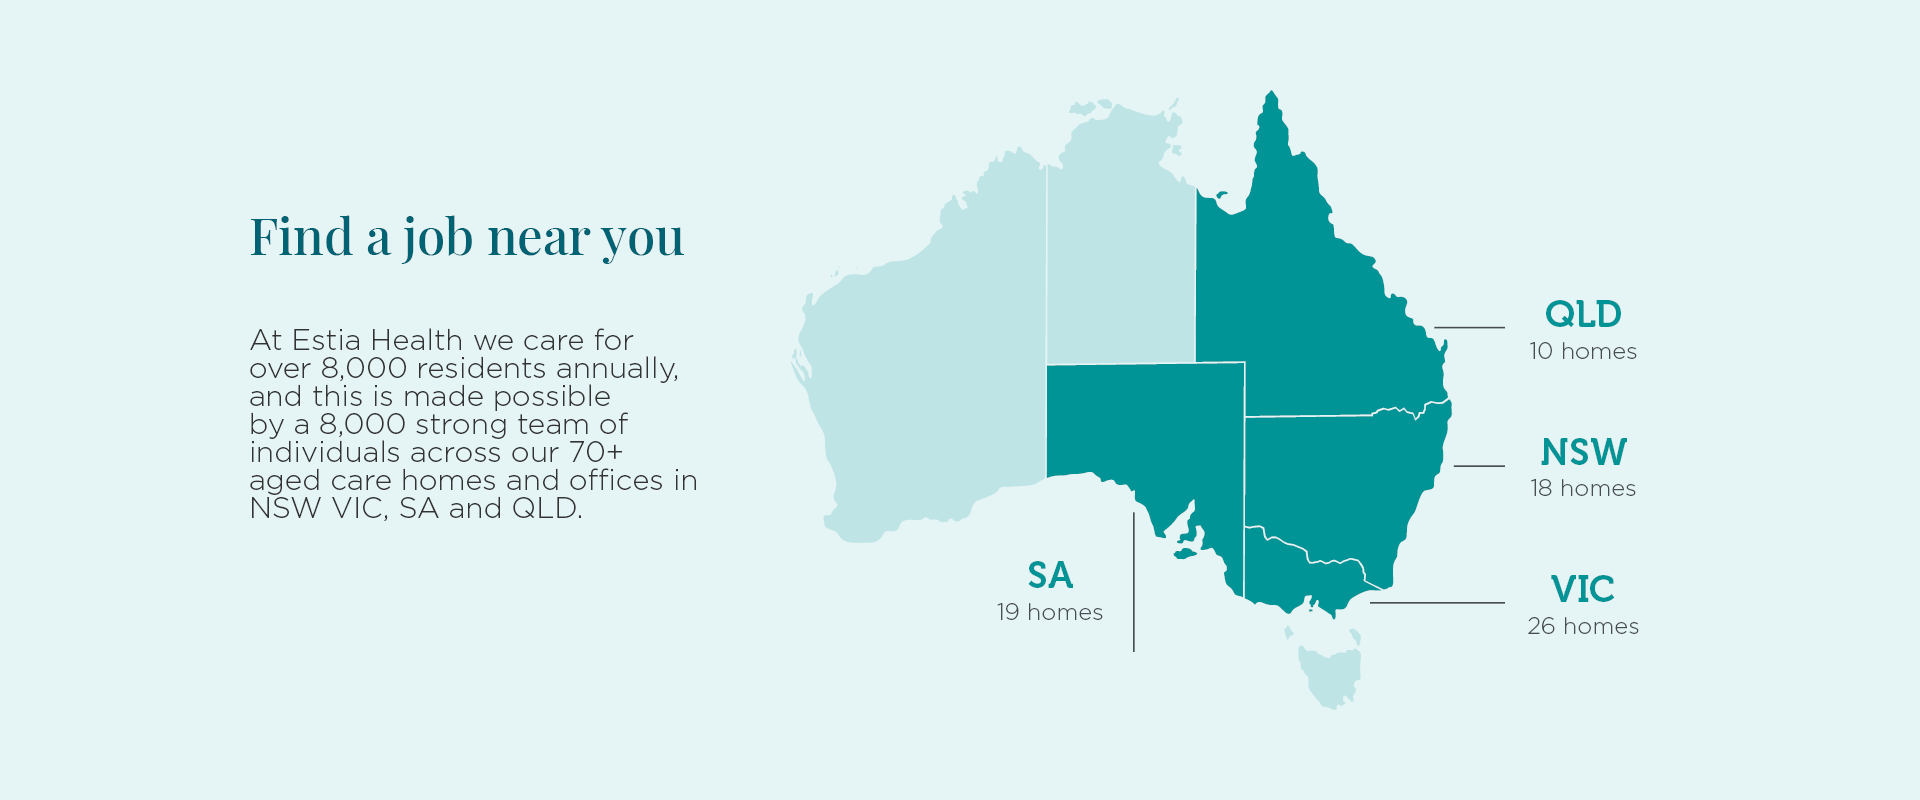 ESTIA_Website Footer Graphic_AUST CAREERS MAP_1440x600_280823.png